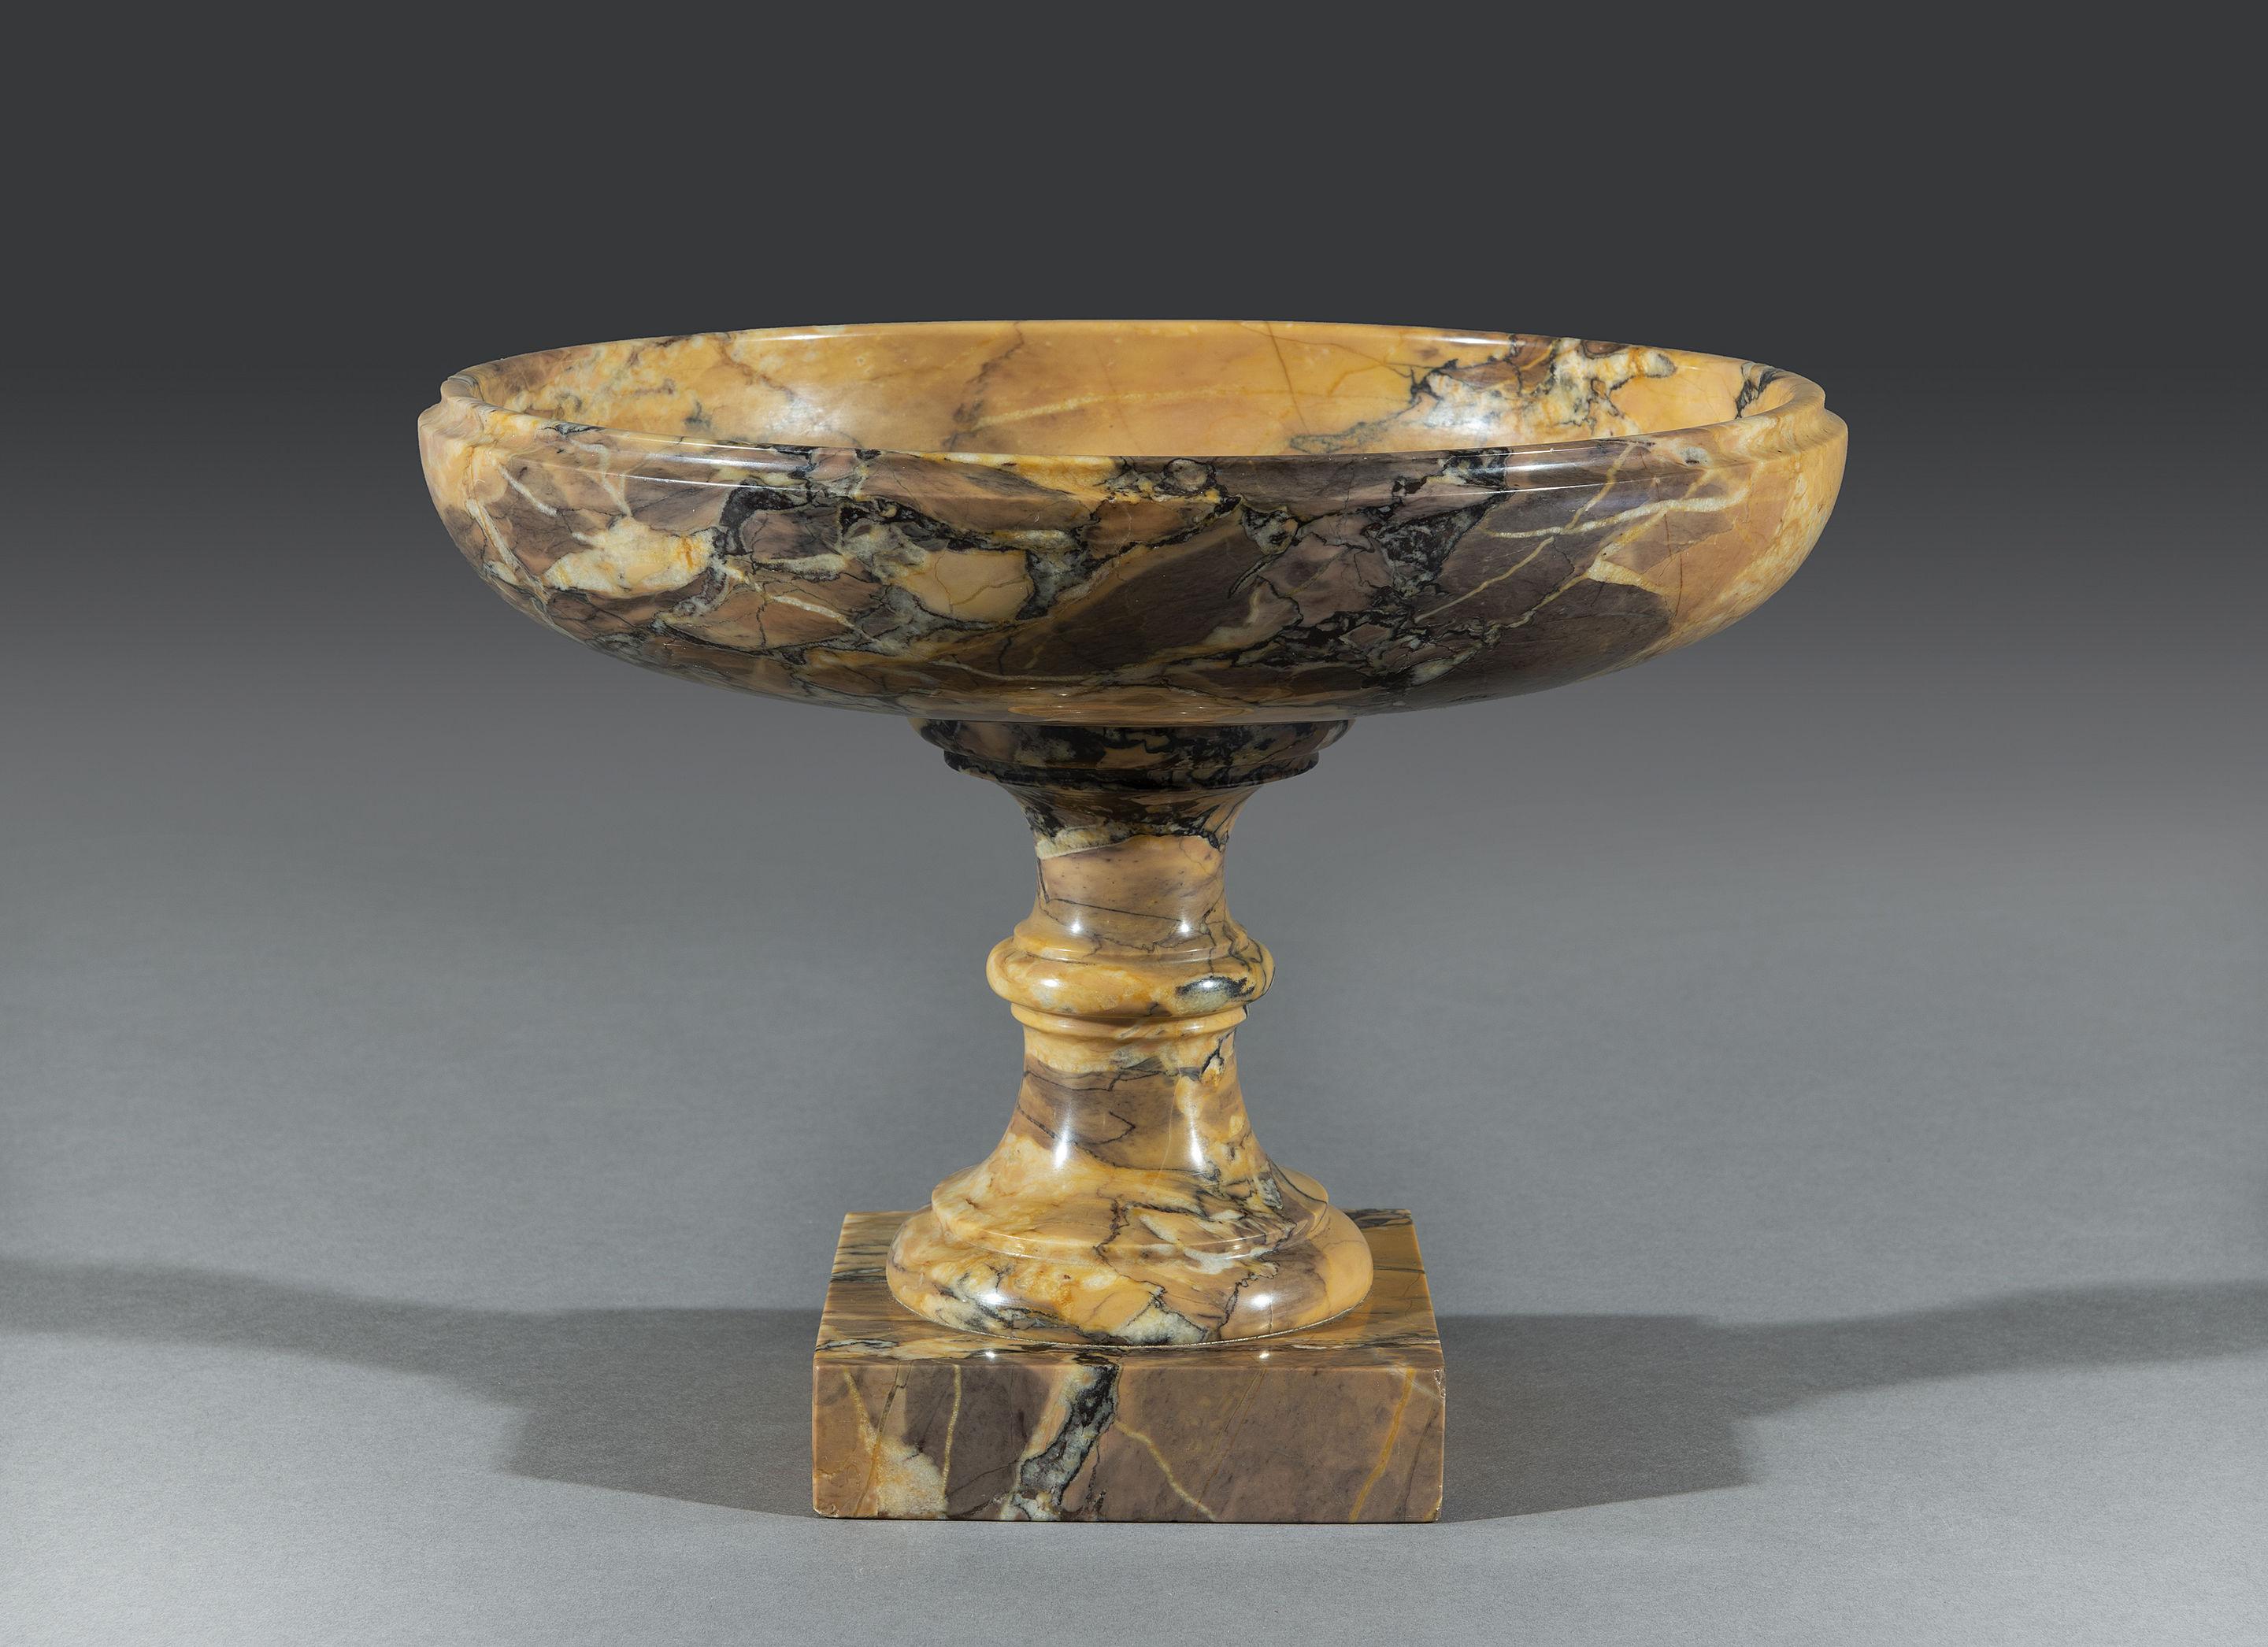 Grand Tour Regency Period 19th Century Sienna Brocatelle Marble Tazza In Excellent Condition For Sale In Bradford on Avon, GB